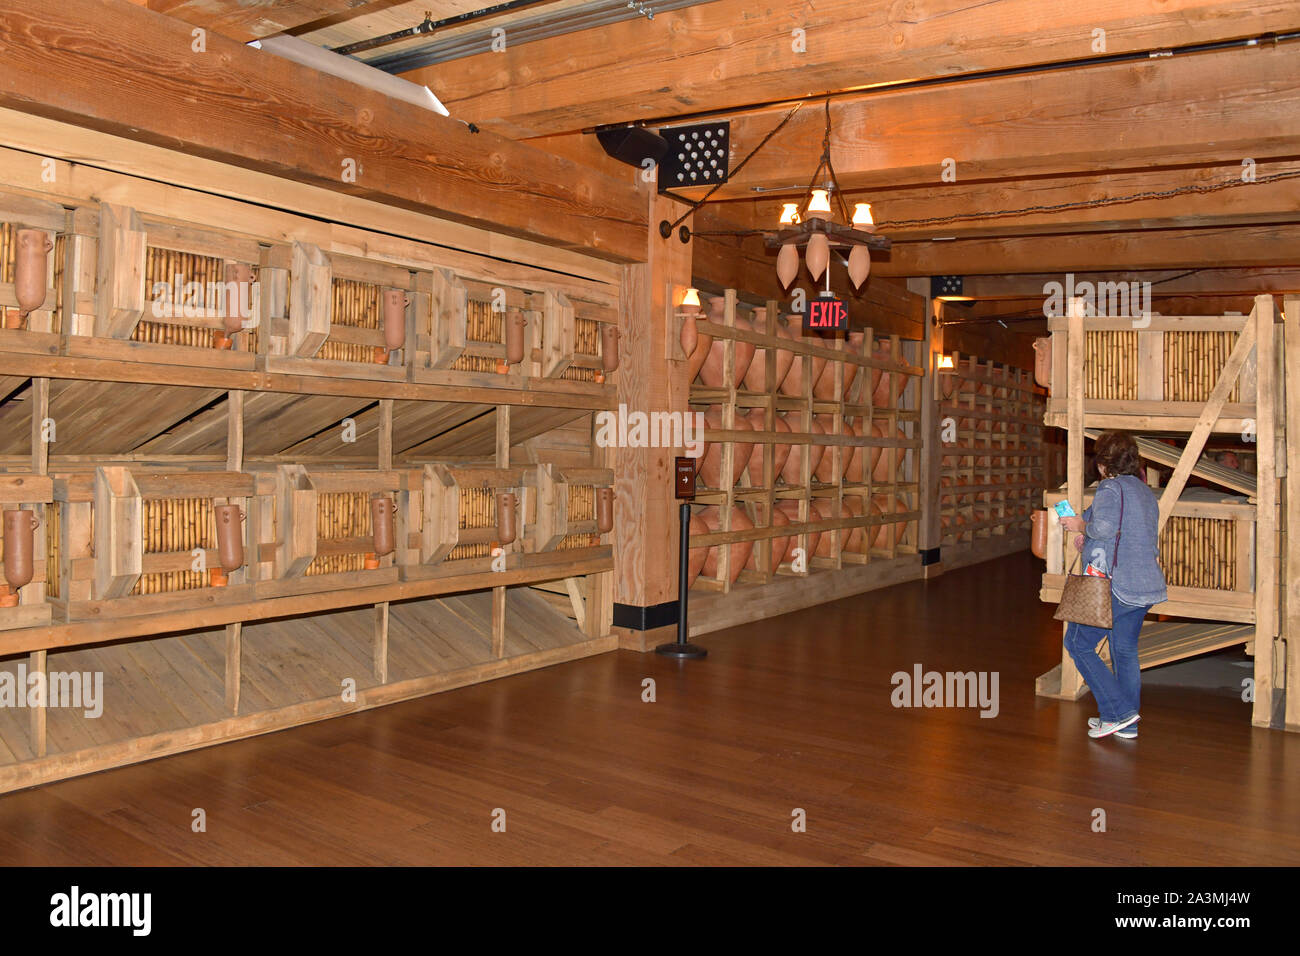 Ark Encounter Williamstown Ky Usa 10 5 19 Animal Cages Inside The Noah S Ark Replica At The Theme Park Stock Photo Alamy